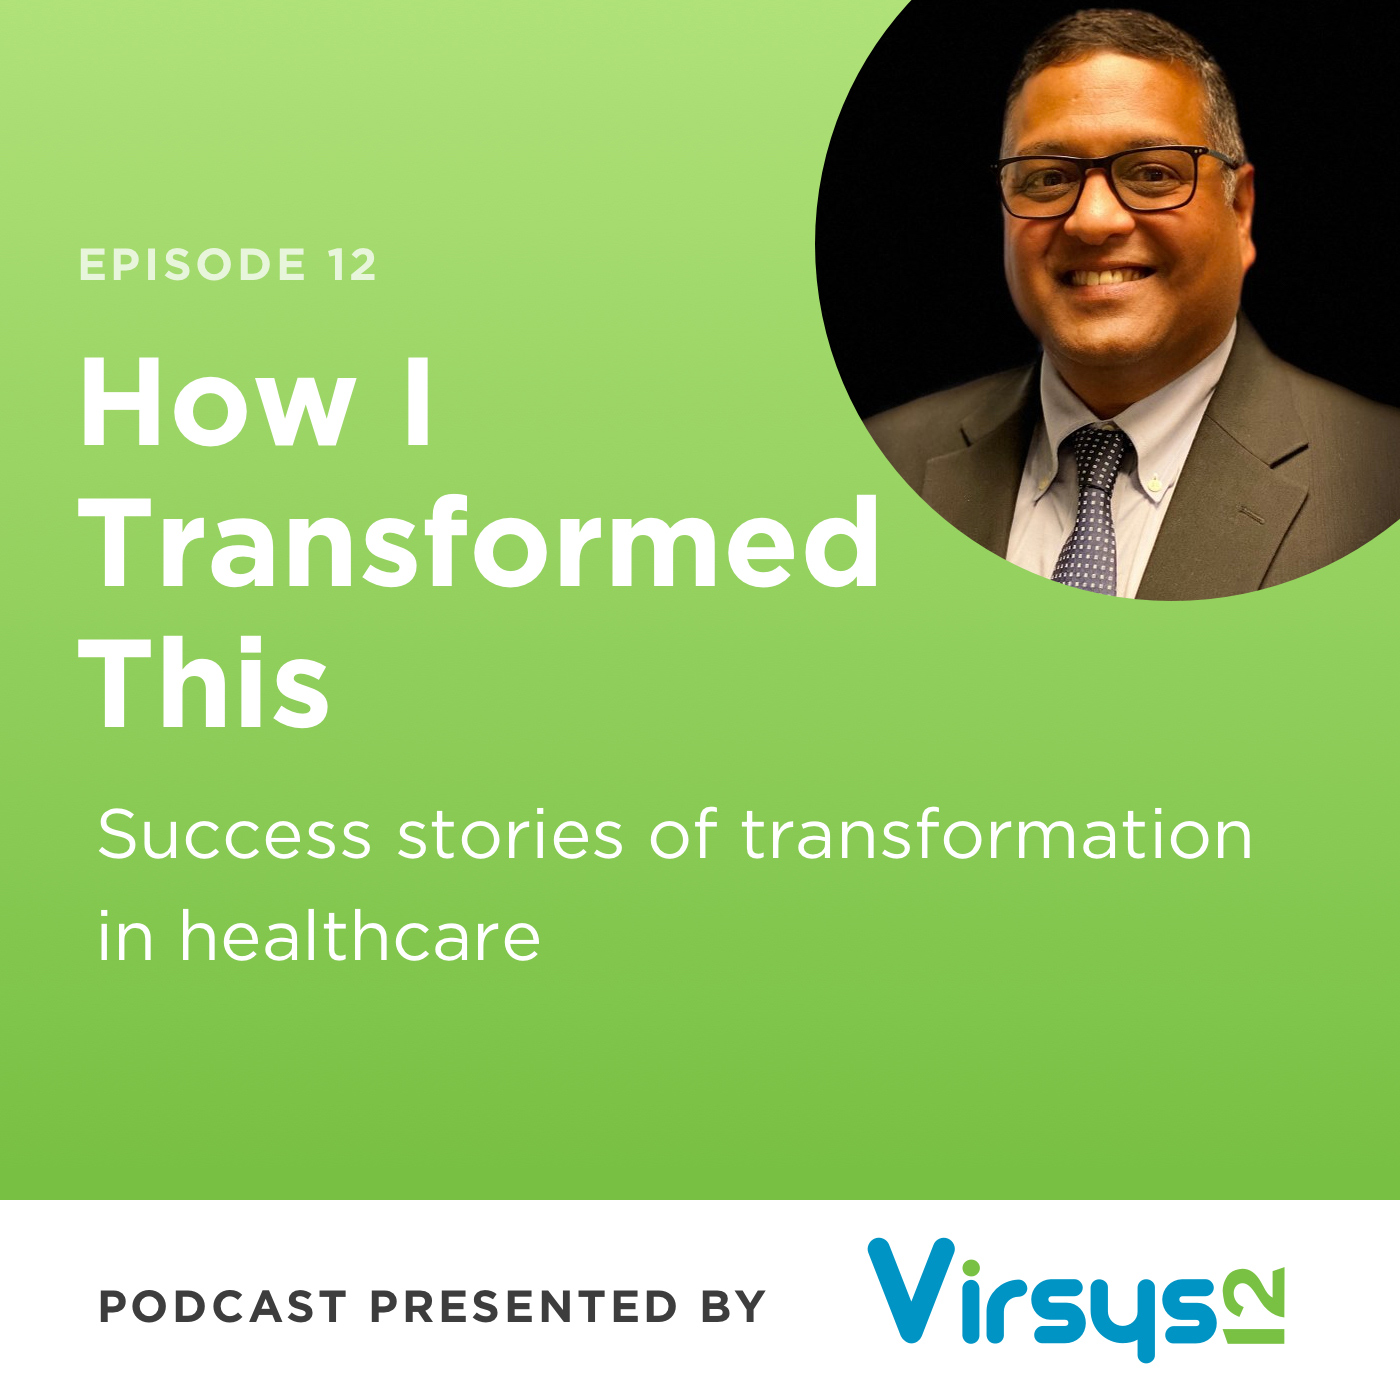 Neal Patel joins us on How I Transformed This